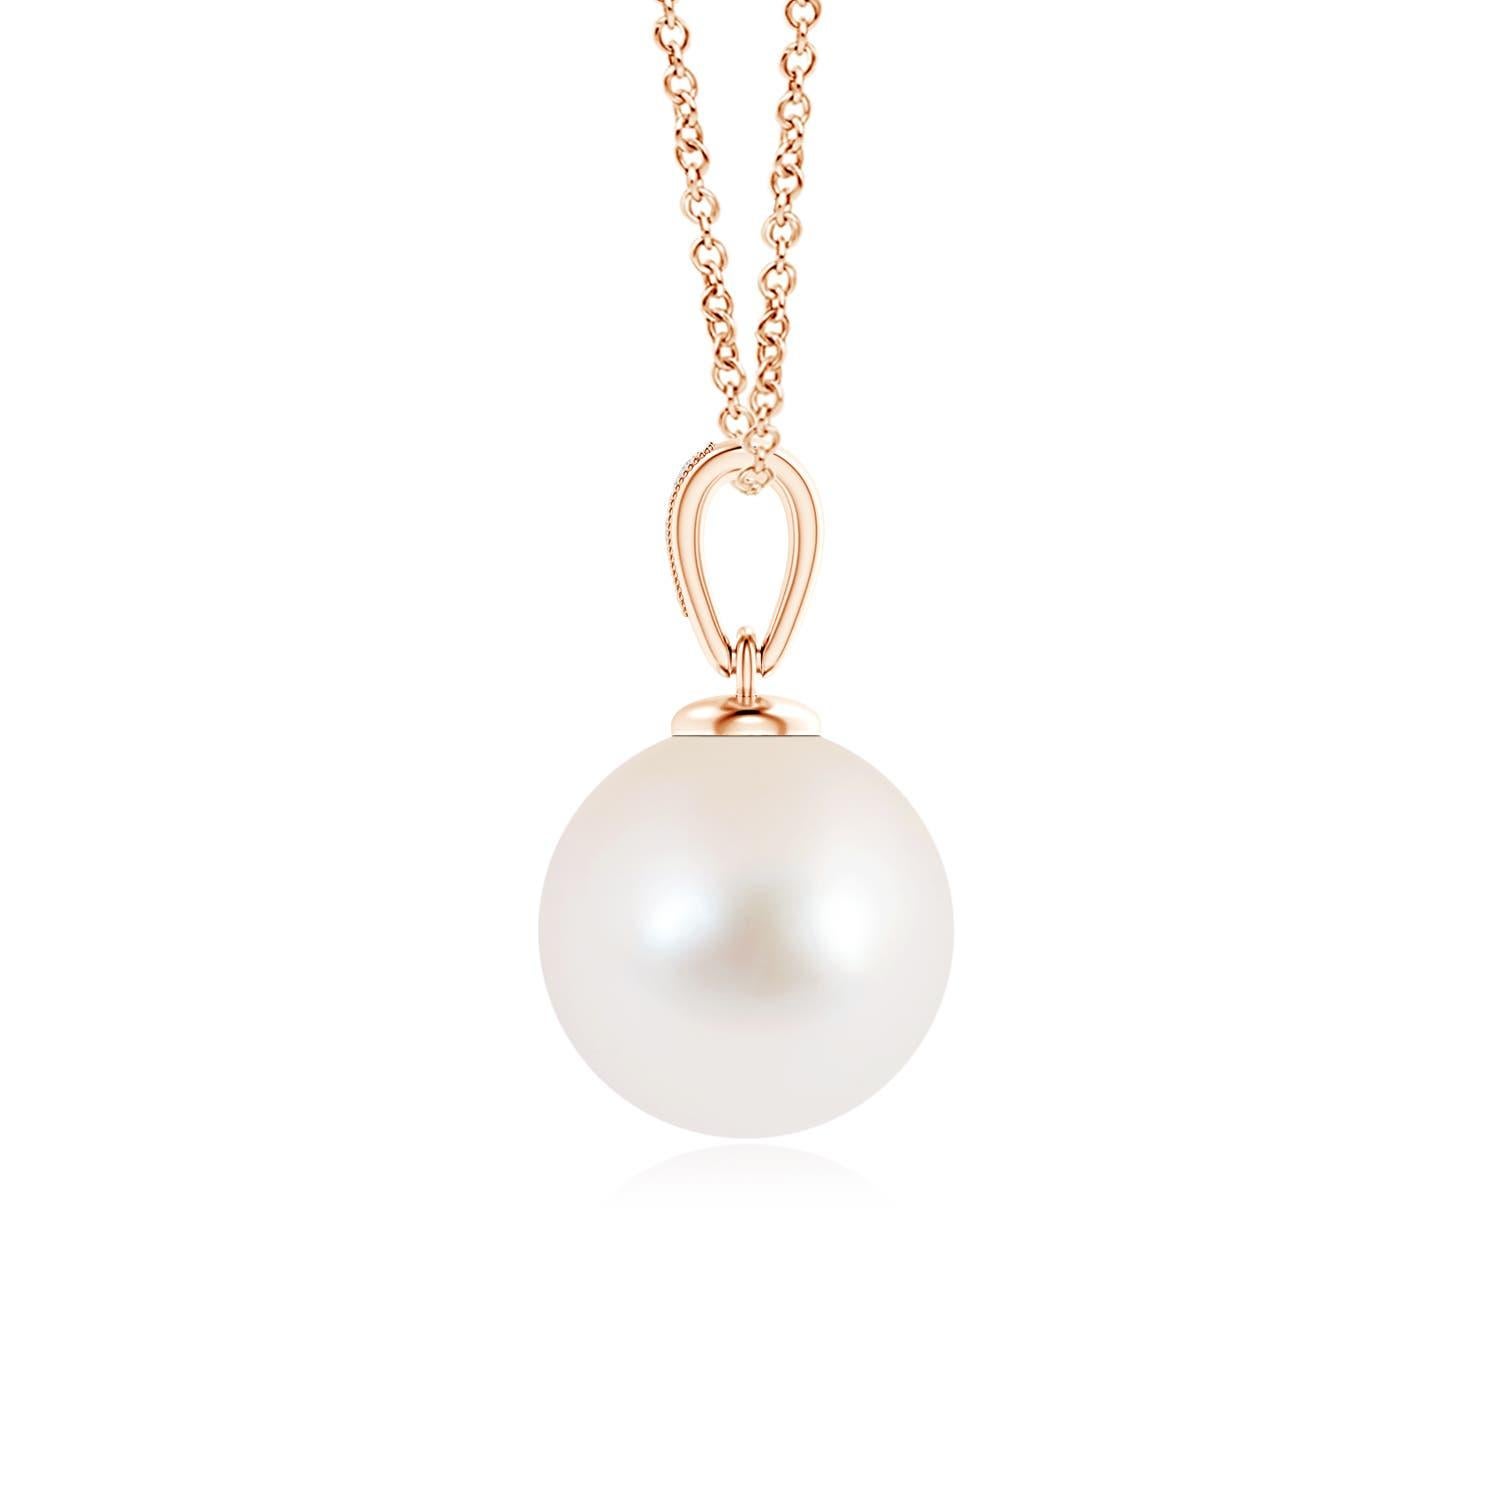 This 14K rose gold solitaire pearl pendant offers a simple yet elegant look. The diamonds pavÃ© set on the bale offer a glittering effect to the lustrous pearl, while the milgrain detail on the bale lends a slight vintage touch. You can flaunt a